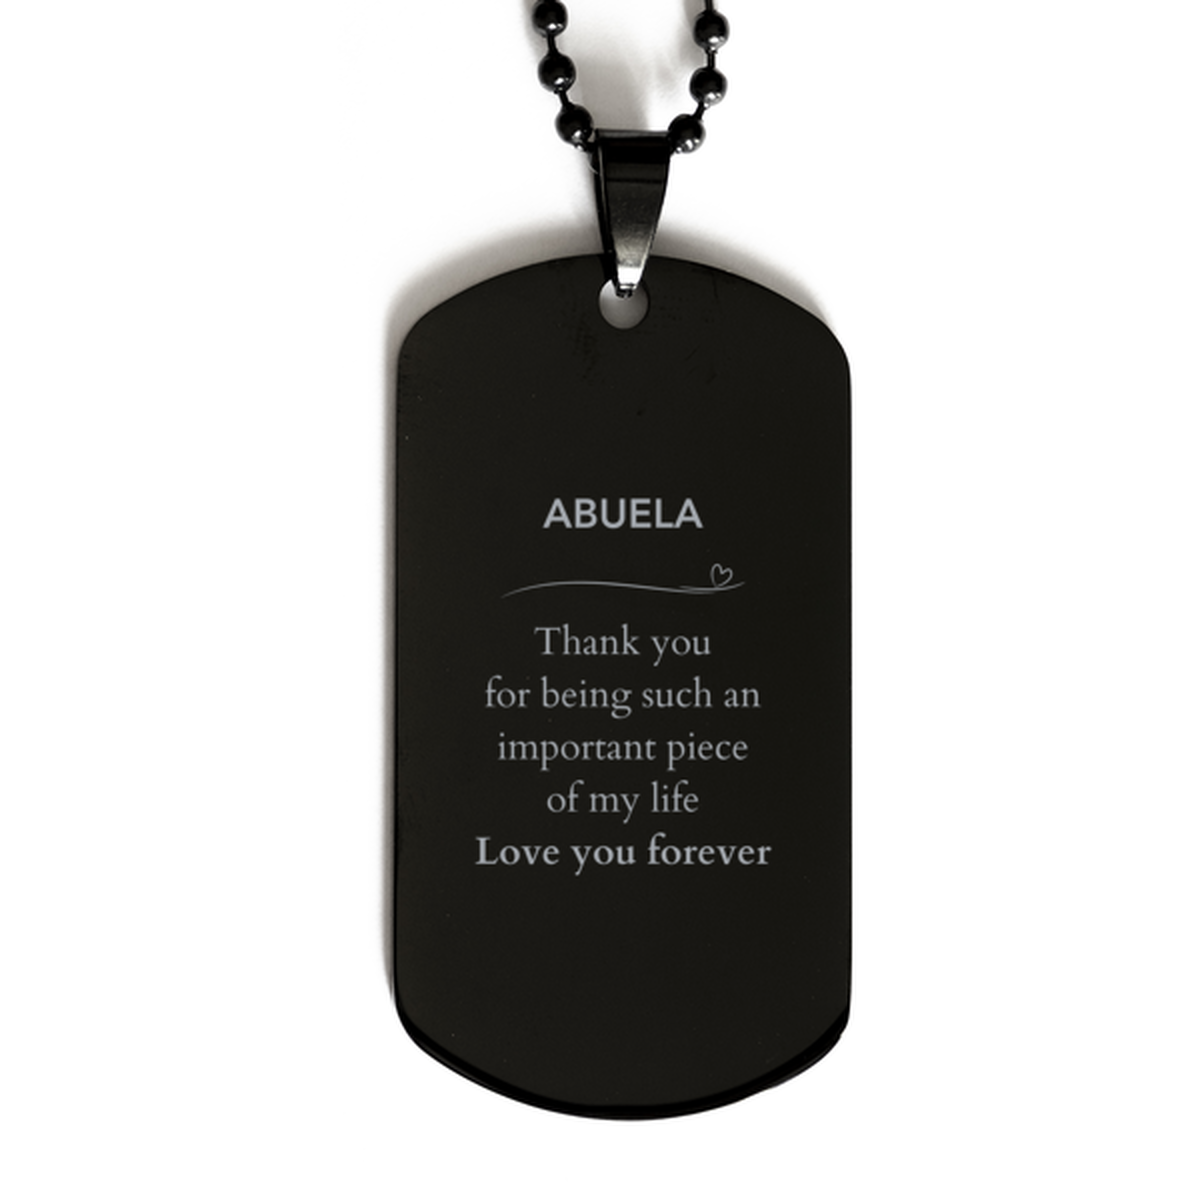 Appropriate Abuela Black Dog Tag Epic Birthday Gifts for Abuela Thank you for being such an important piece of my life Abuela Christmas Mothers Fathers Day